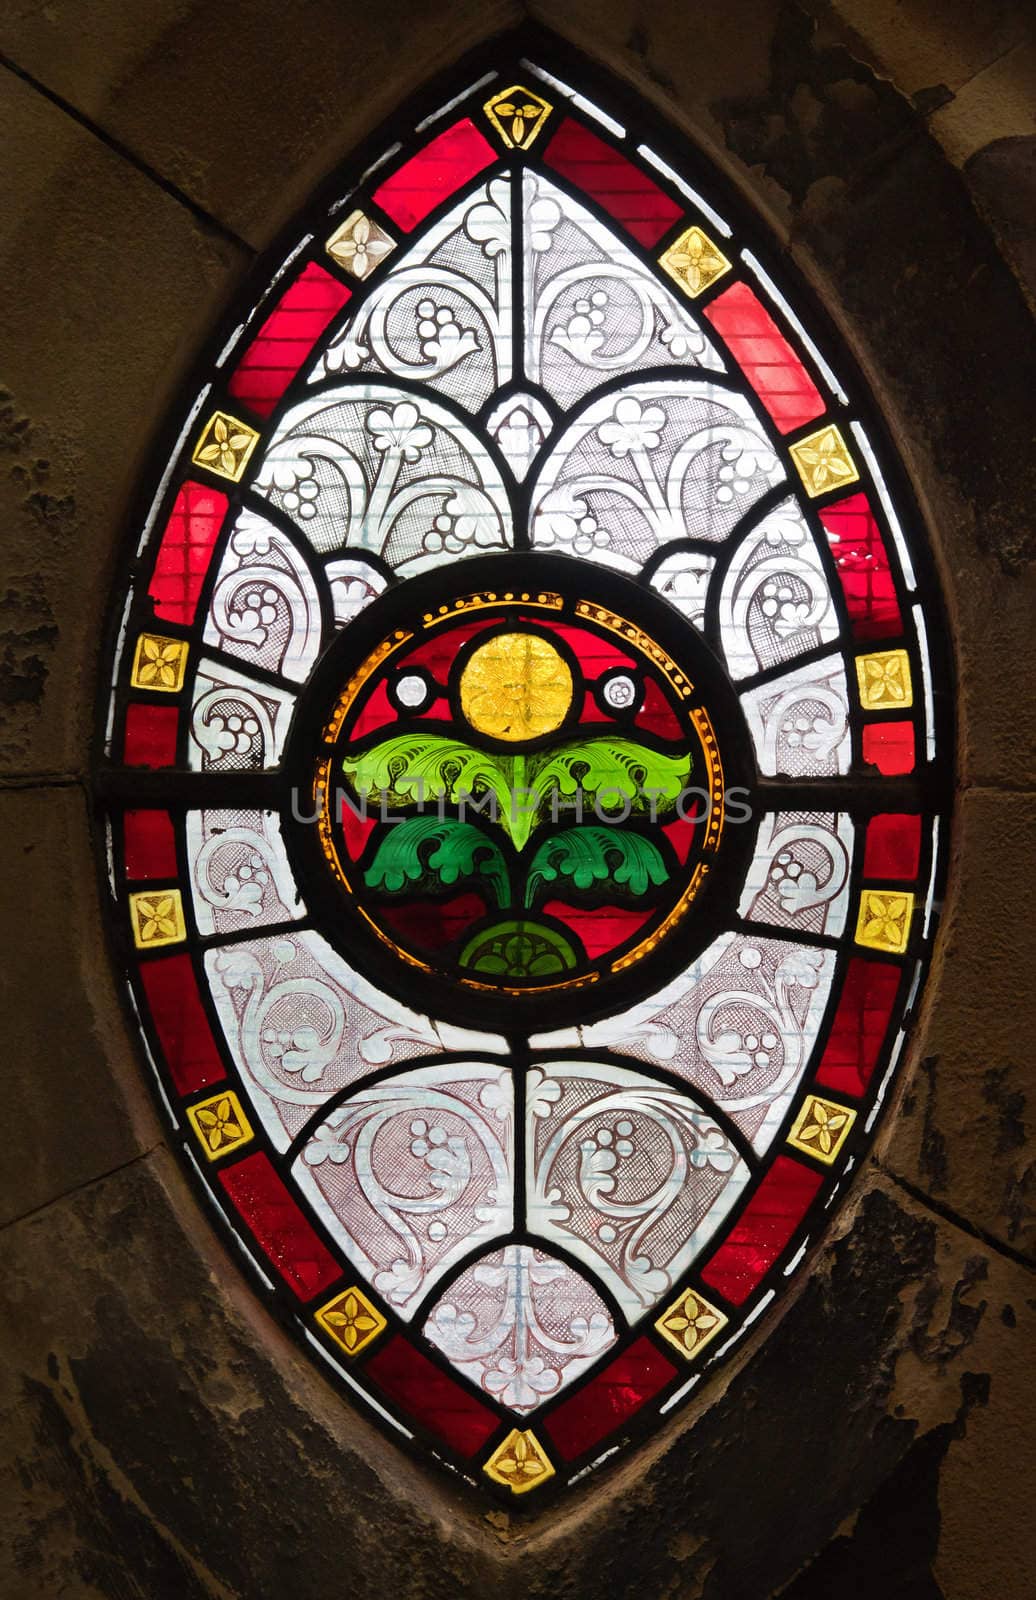 Gothis ornamental stained glass window in a medeval church